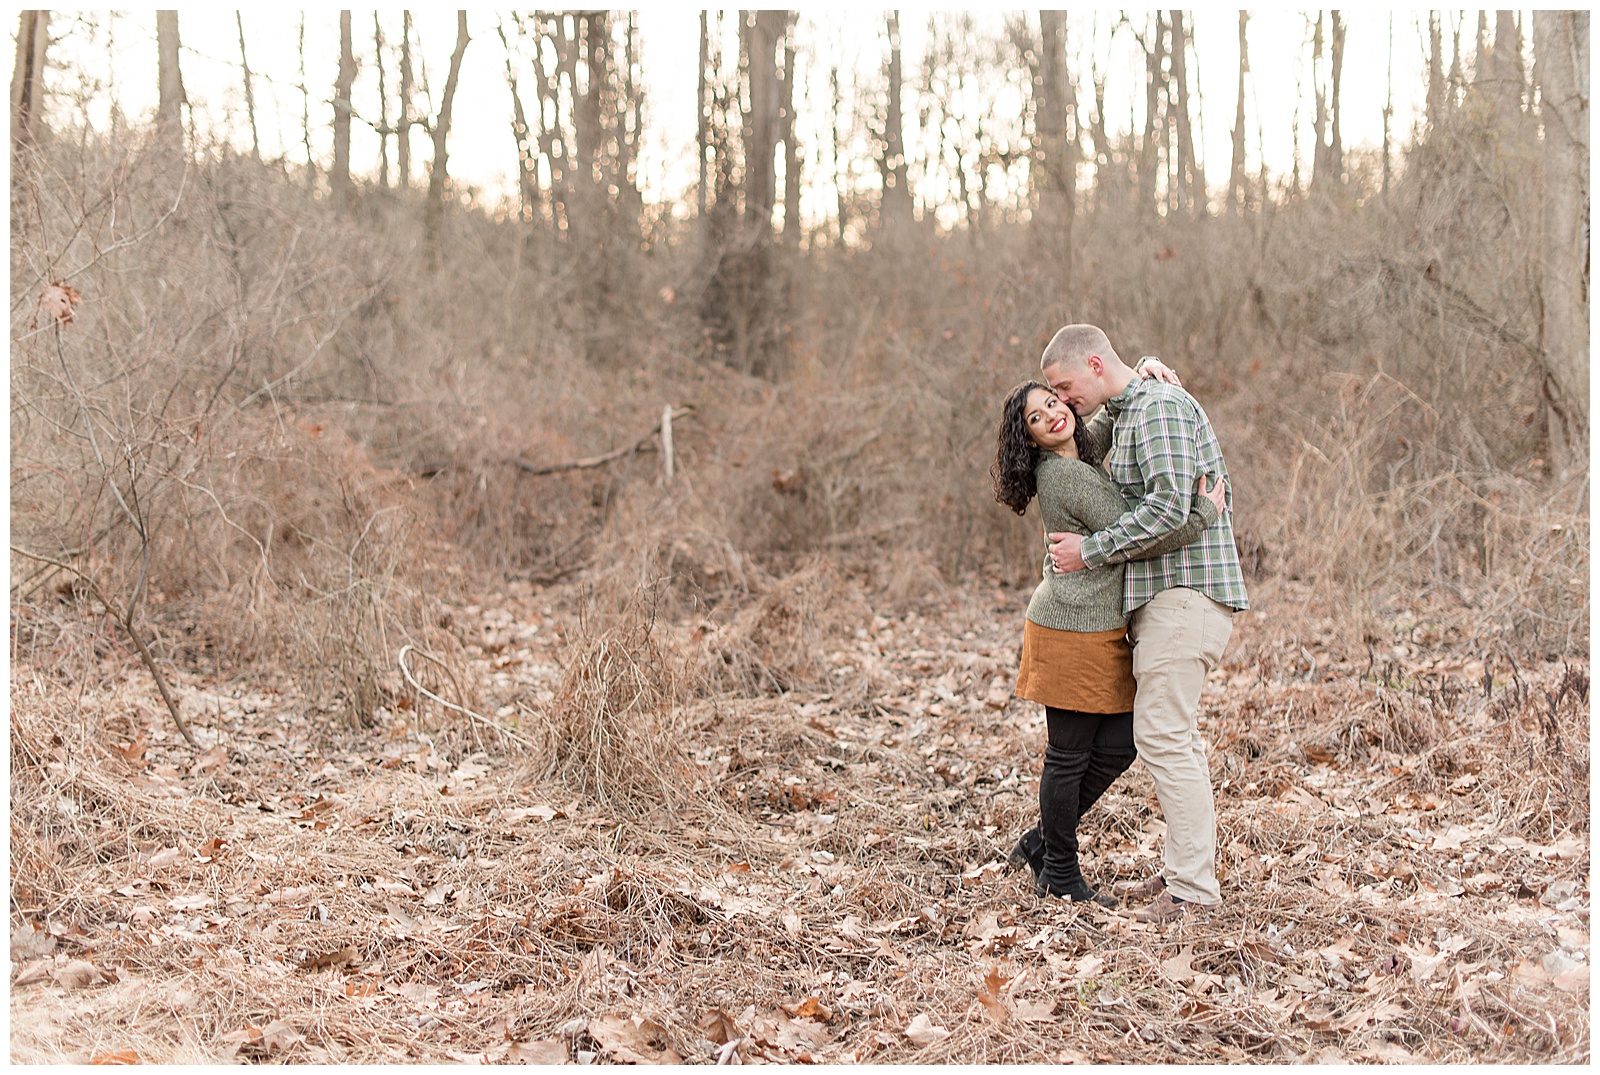 engaged couple standing in wooded area during winter all wrapped up